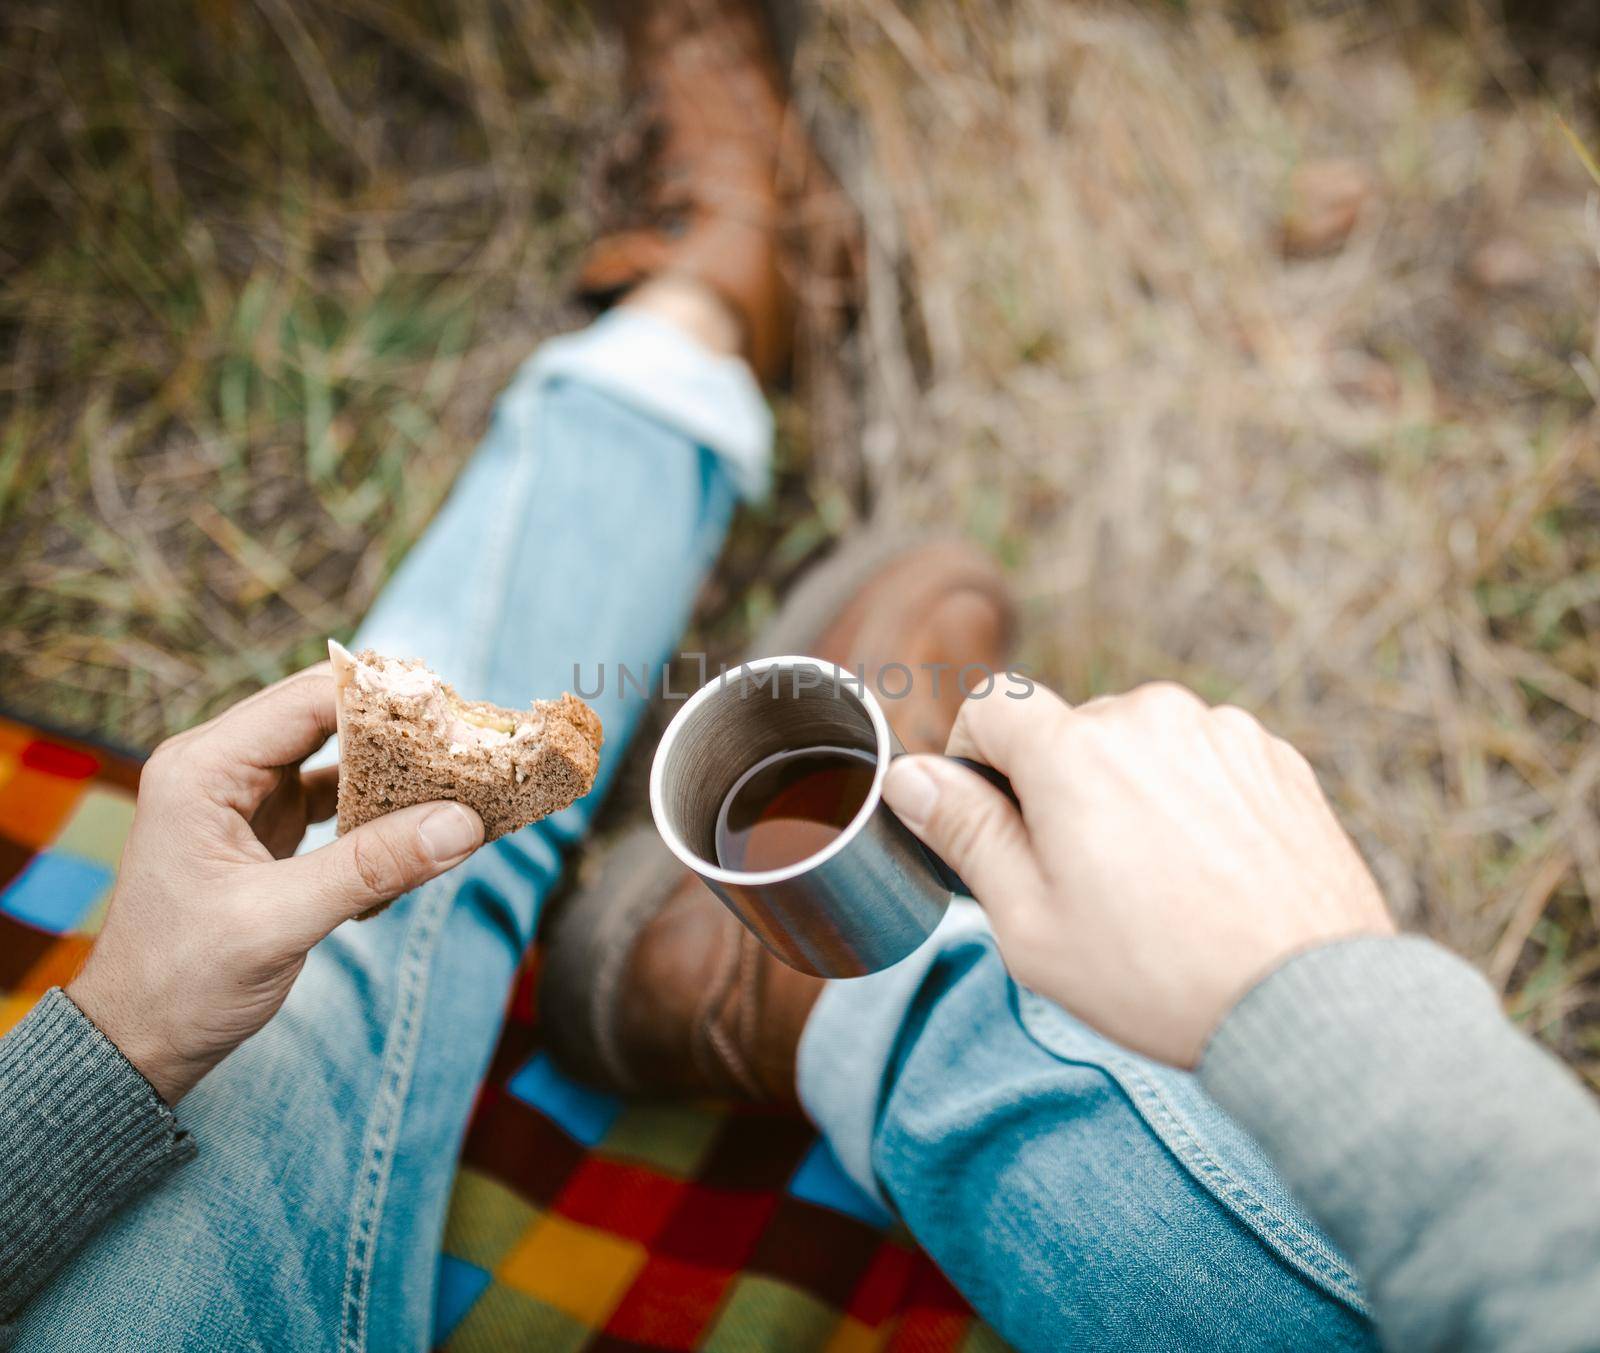 Young Man Eats Snack And Drinks Tea Sitting On Picnic Blanket At Grass, Focus On Caucasian Guy's Hands Holding Snack And Metal Cup With Hot Drink In Nature Outdoors, Close Up Shot, High Angle View